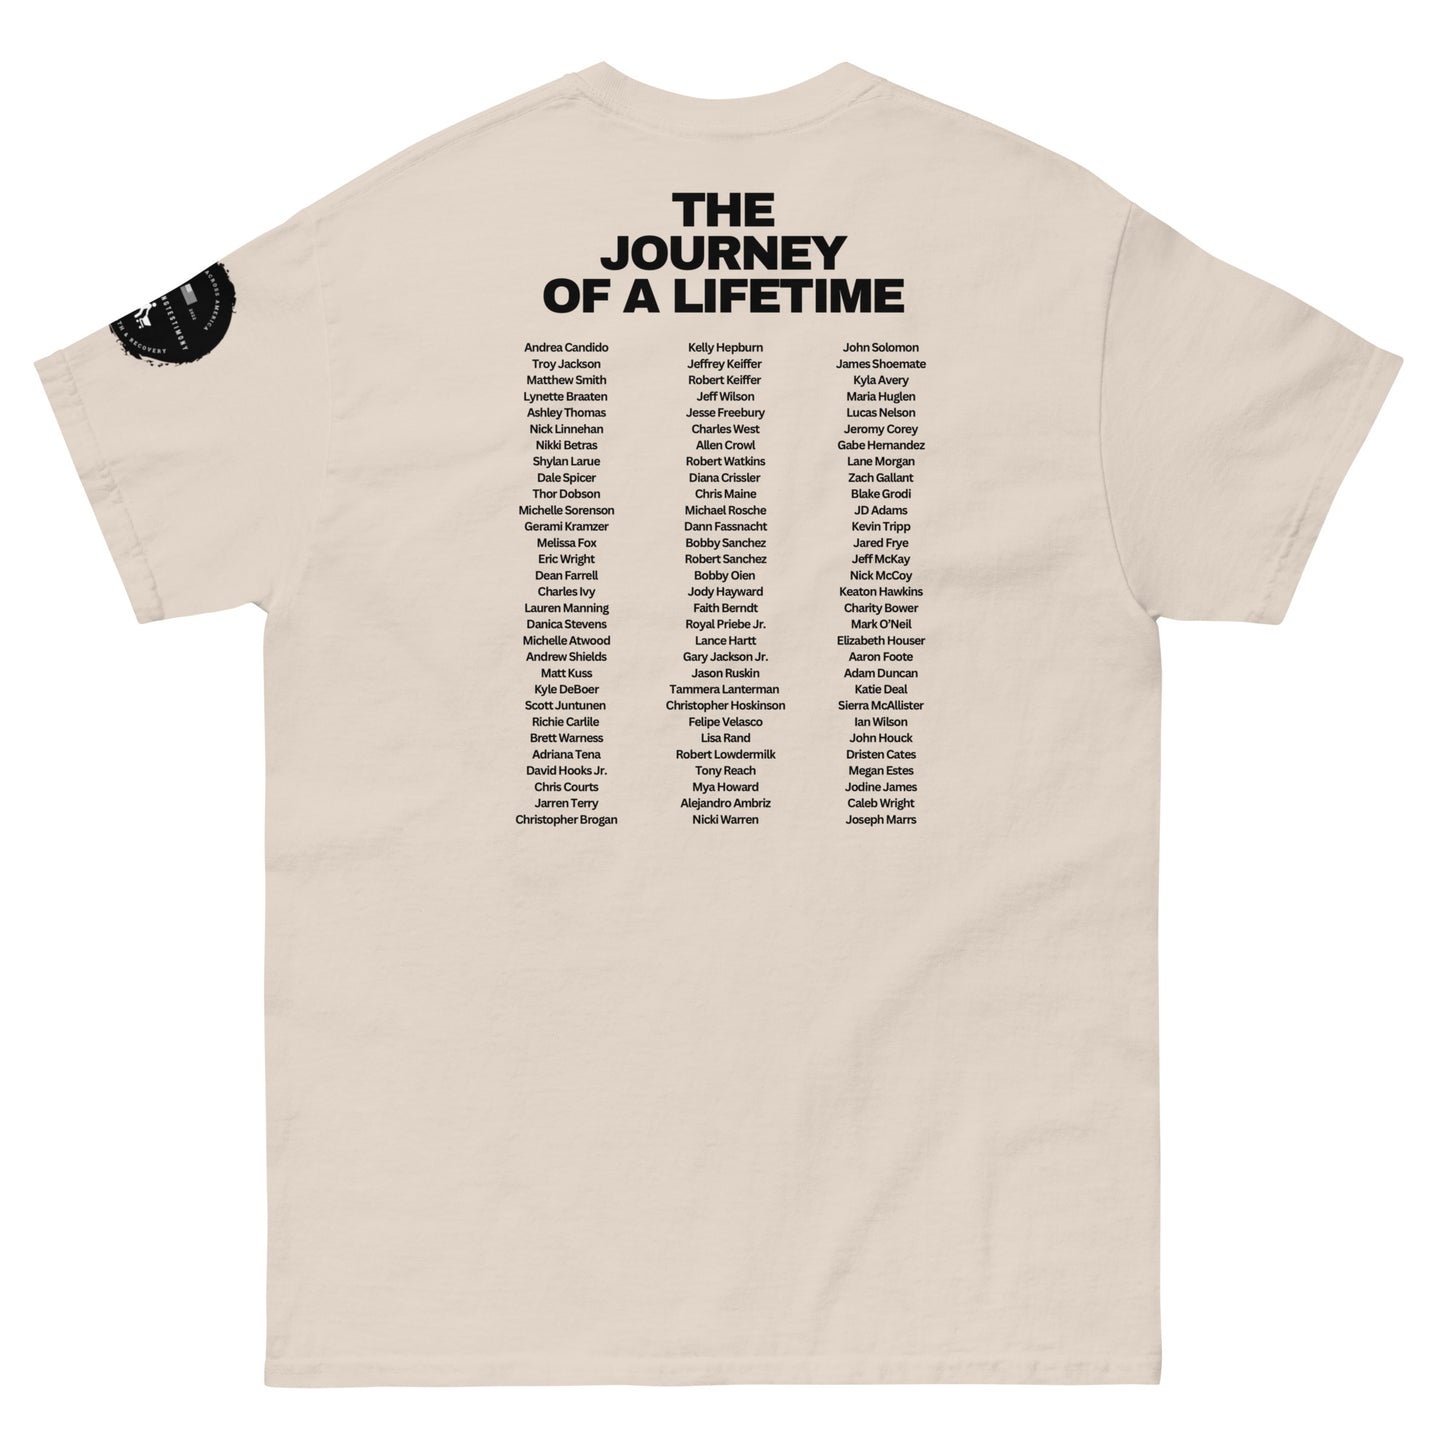 Official A Walking Testimony shirt Edition 4 (light colors)